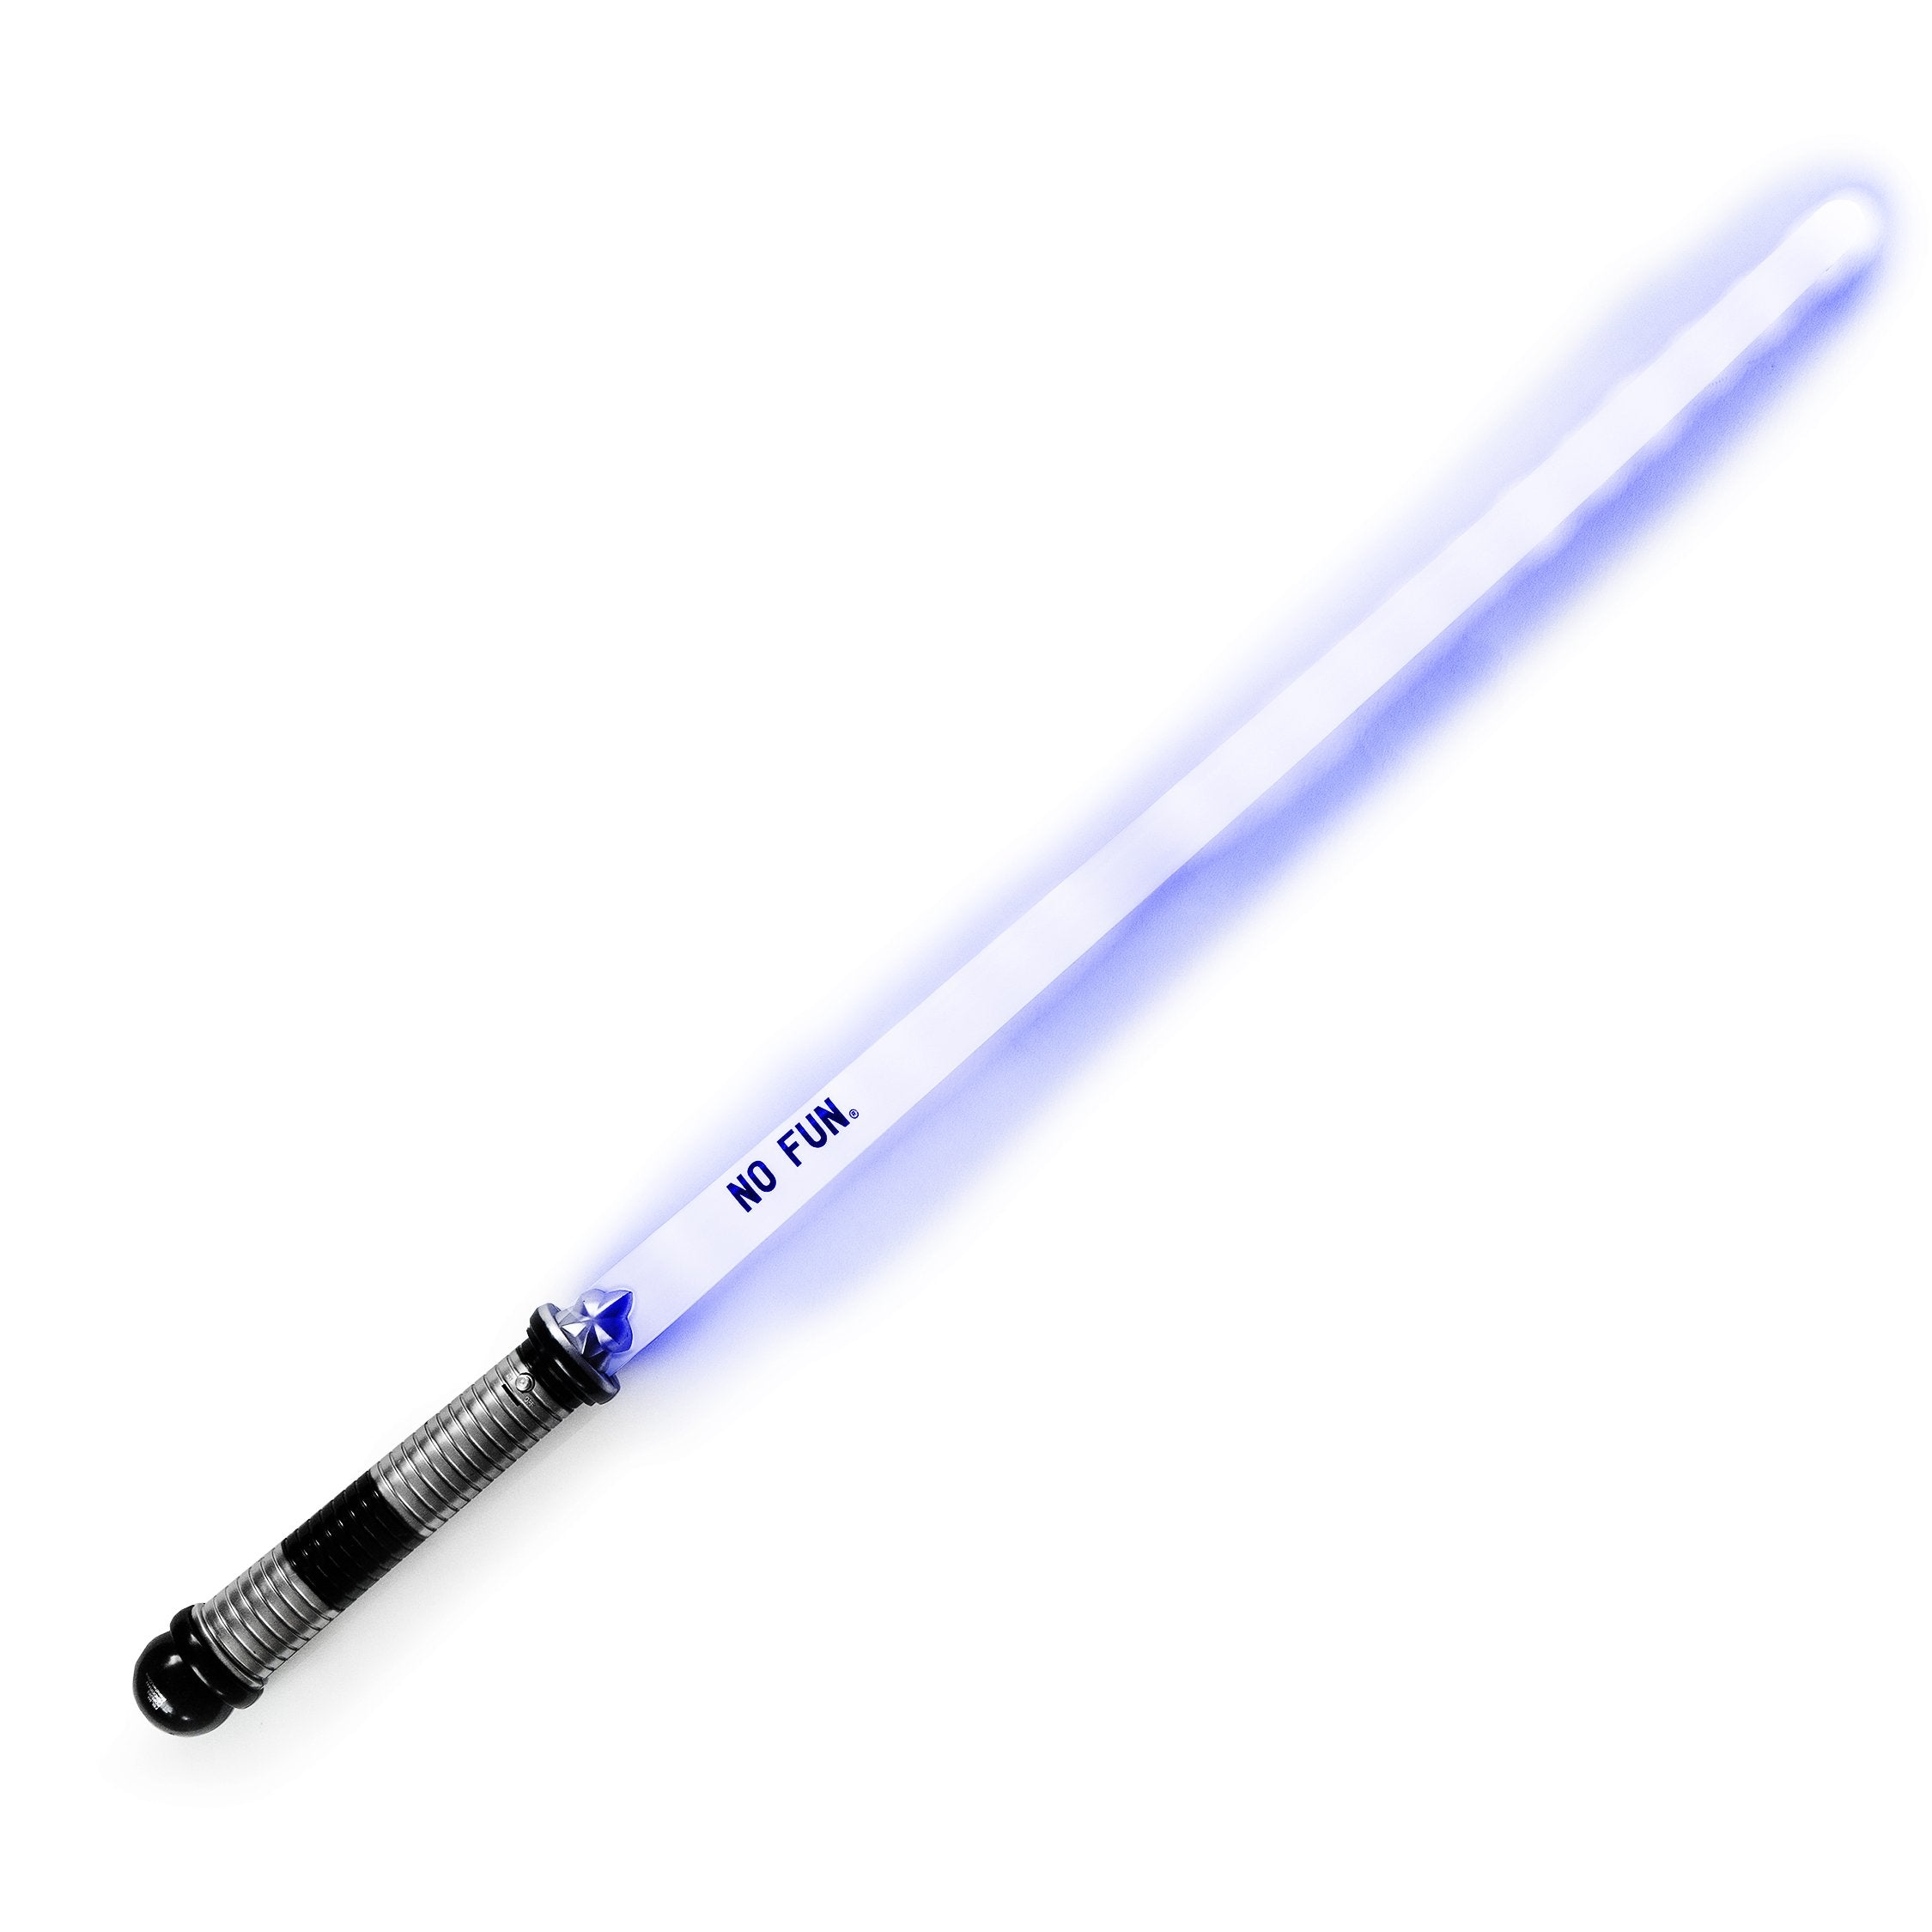 Photo of a light up novelty sword glowing blue on a white background. Near the handle is a Black "NO FUN®" logo."